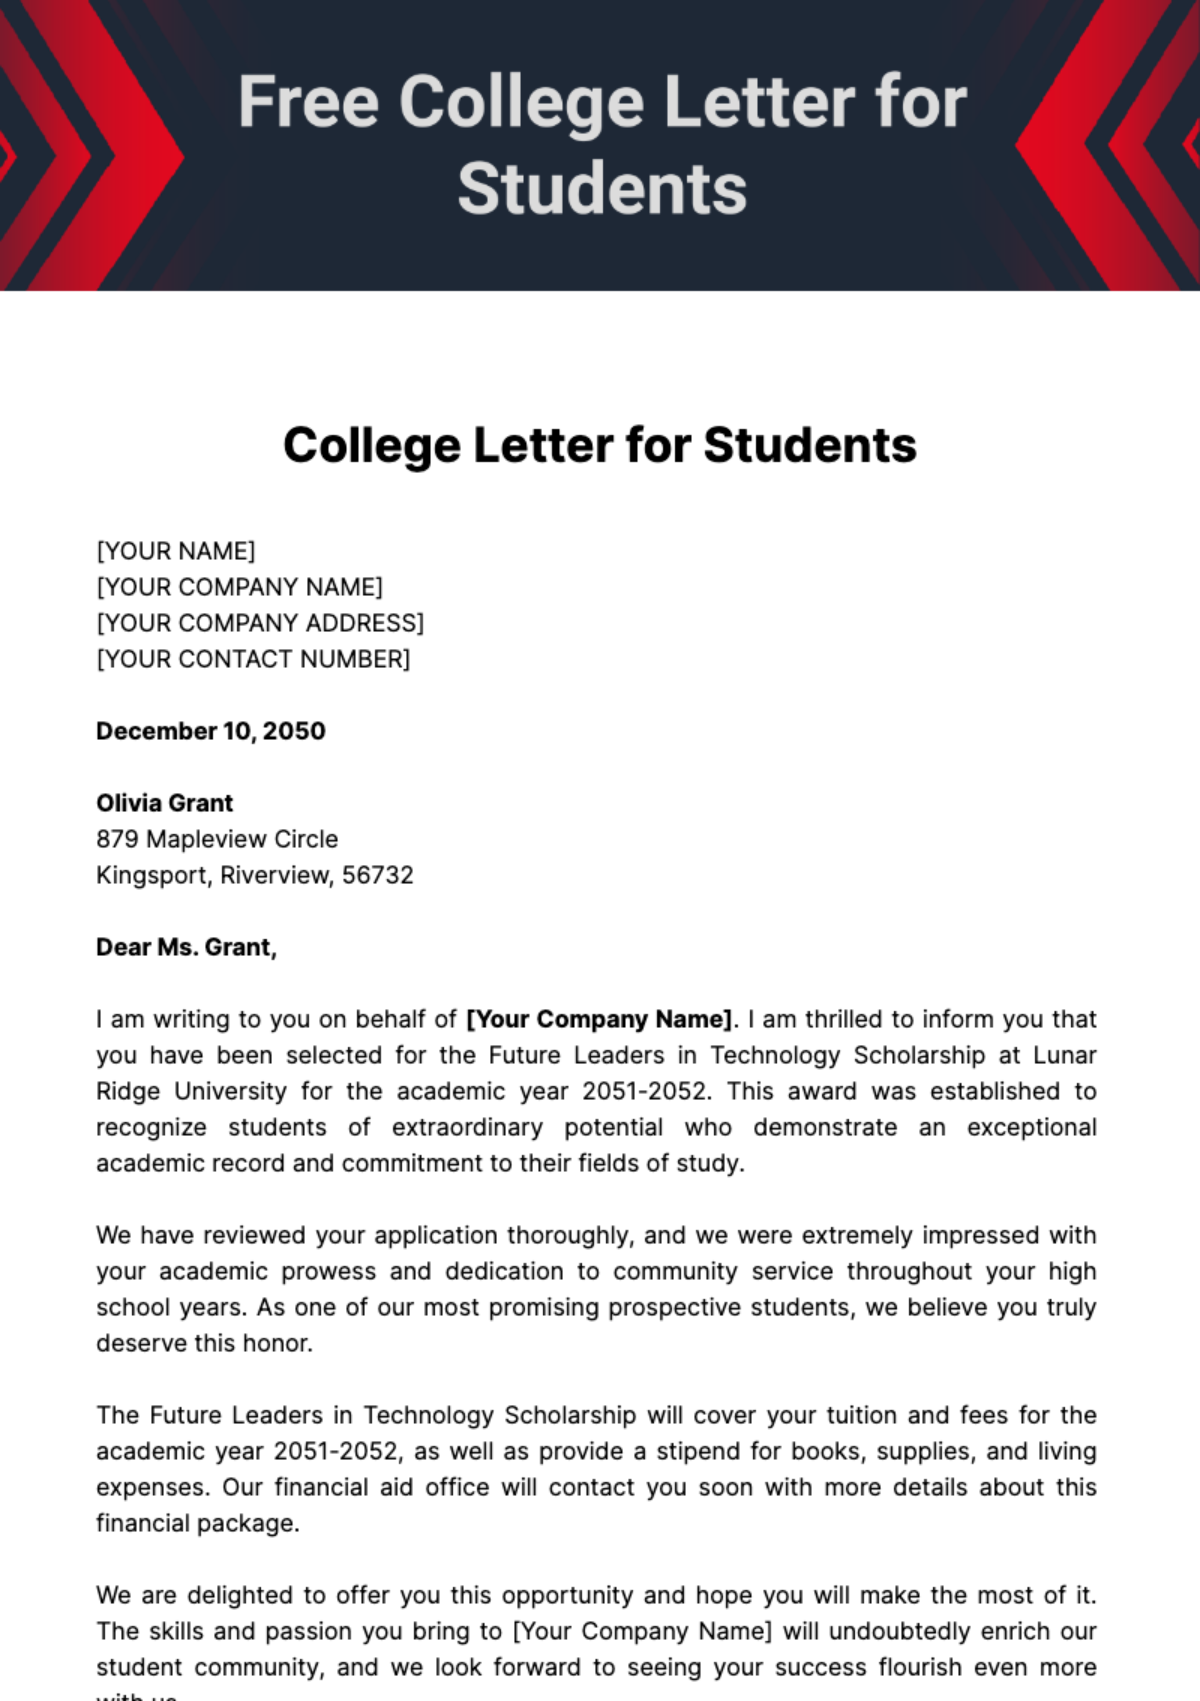 Free College Letter for Students Template